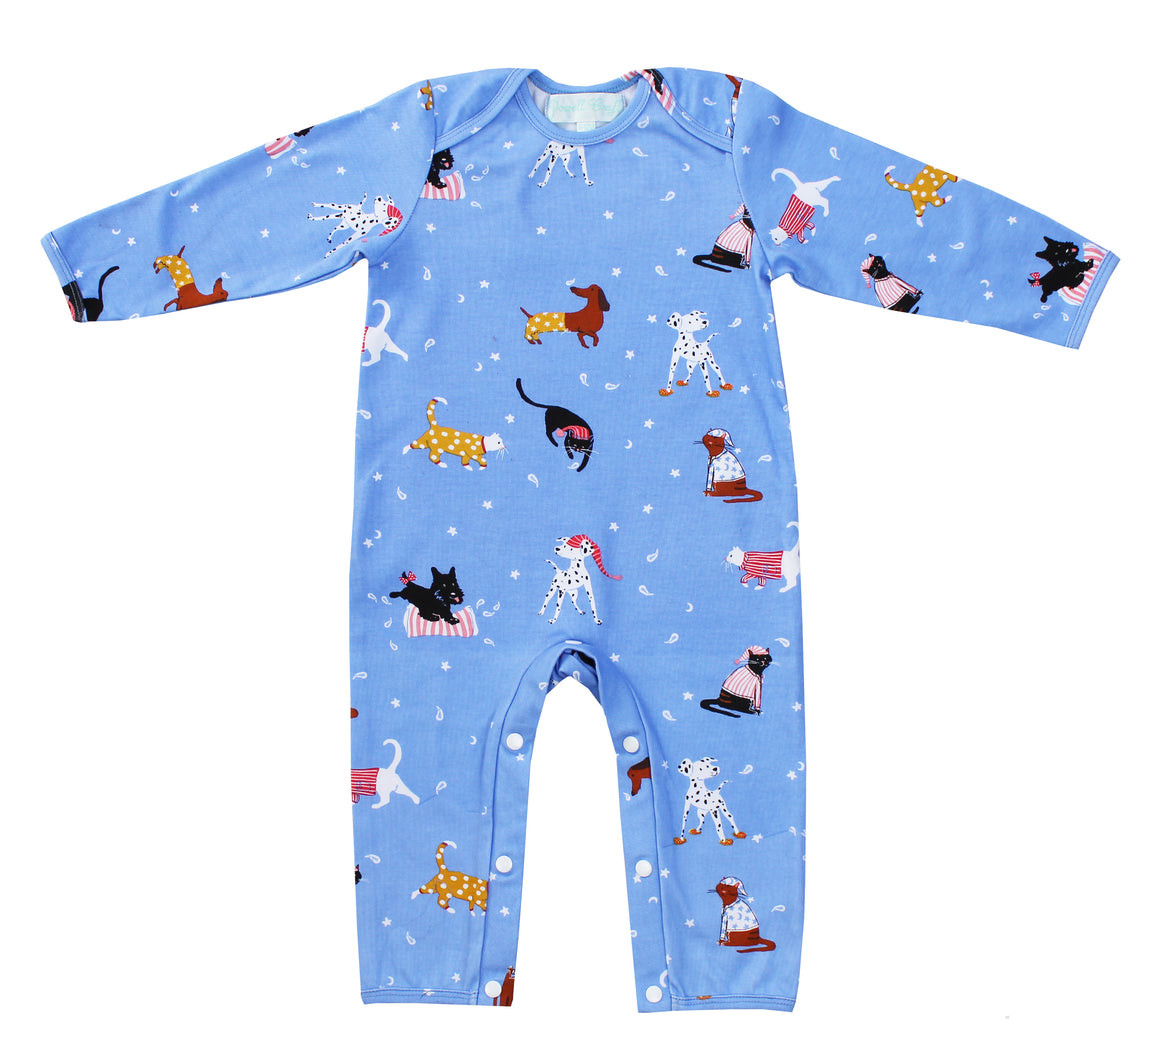 Powell Craft Cats and Dogs Baby Jumpsuit with long sleeves and full length legs, a light blue background with various cats and dogs pattern